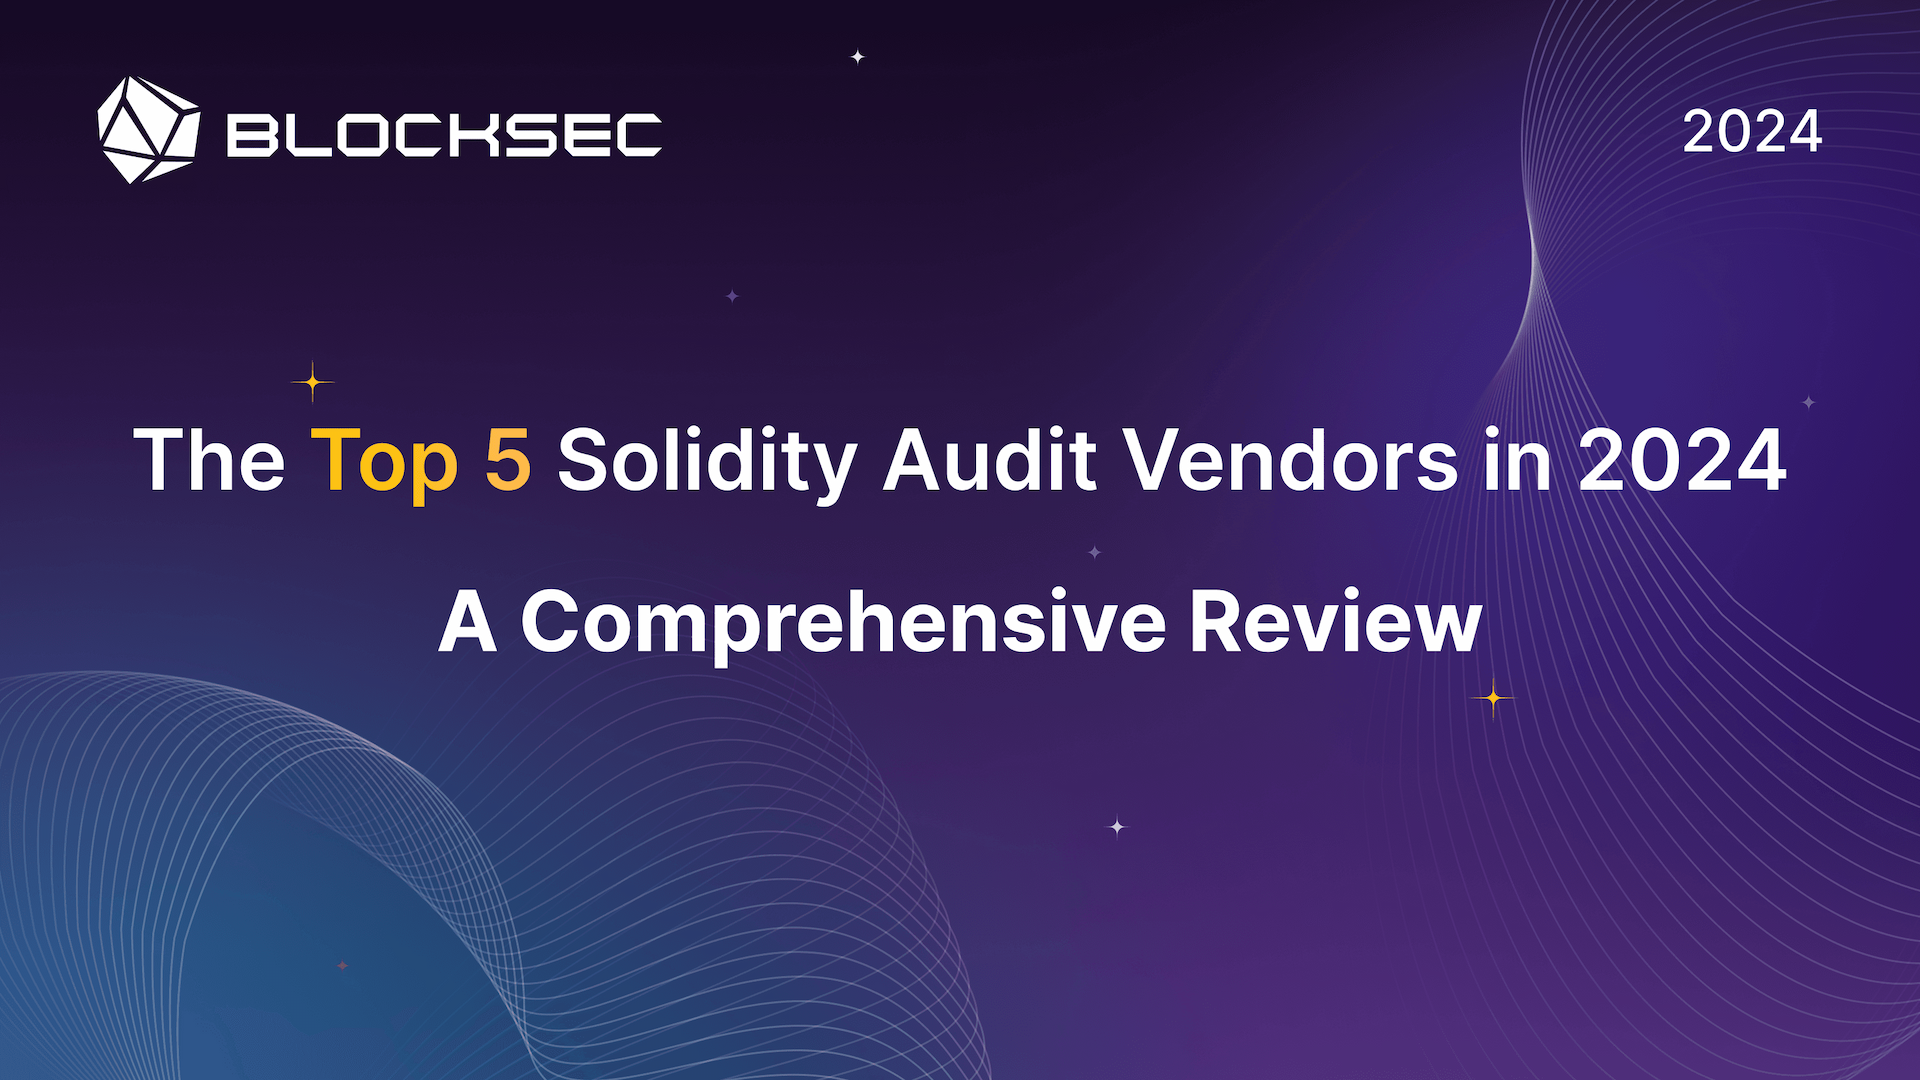 The Top 5 Solidity Audit Vendors in 2024: A Comprehensive Review